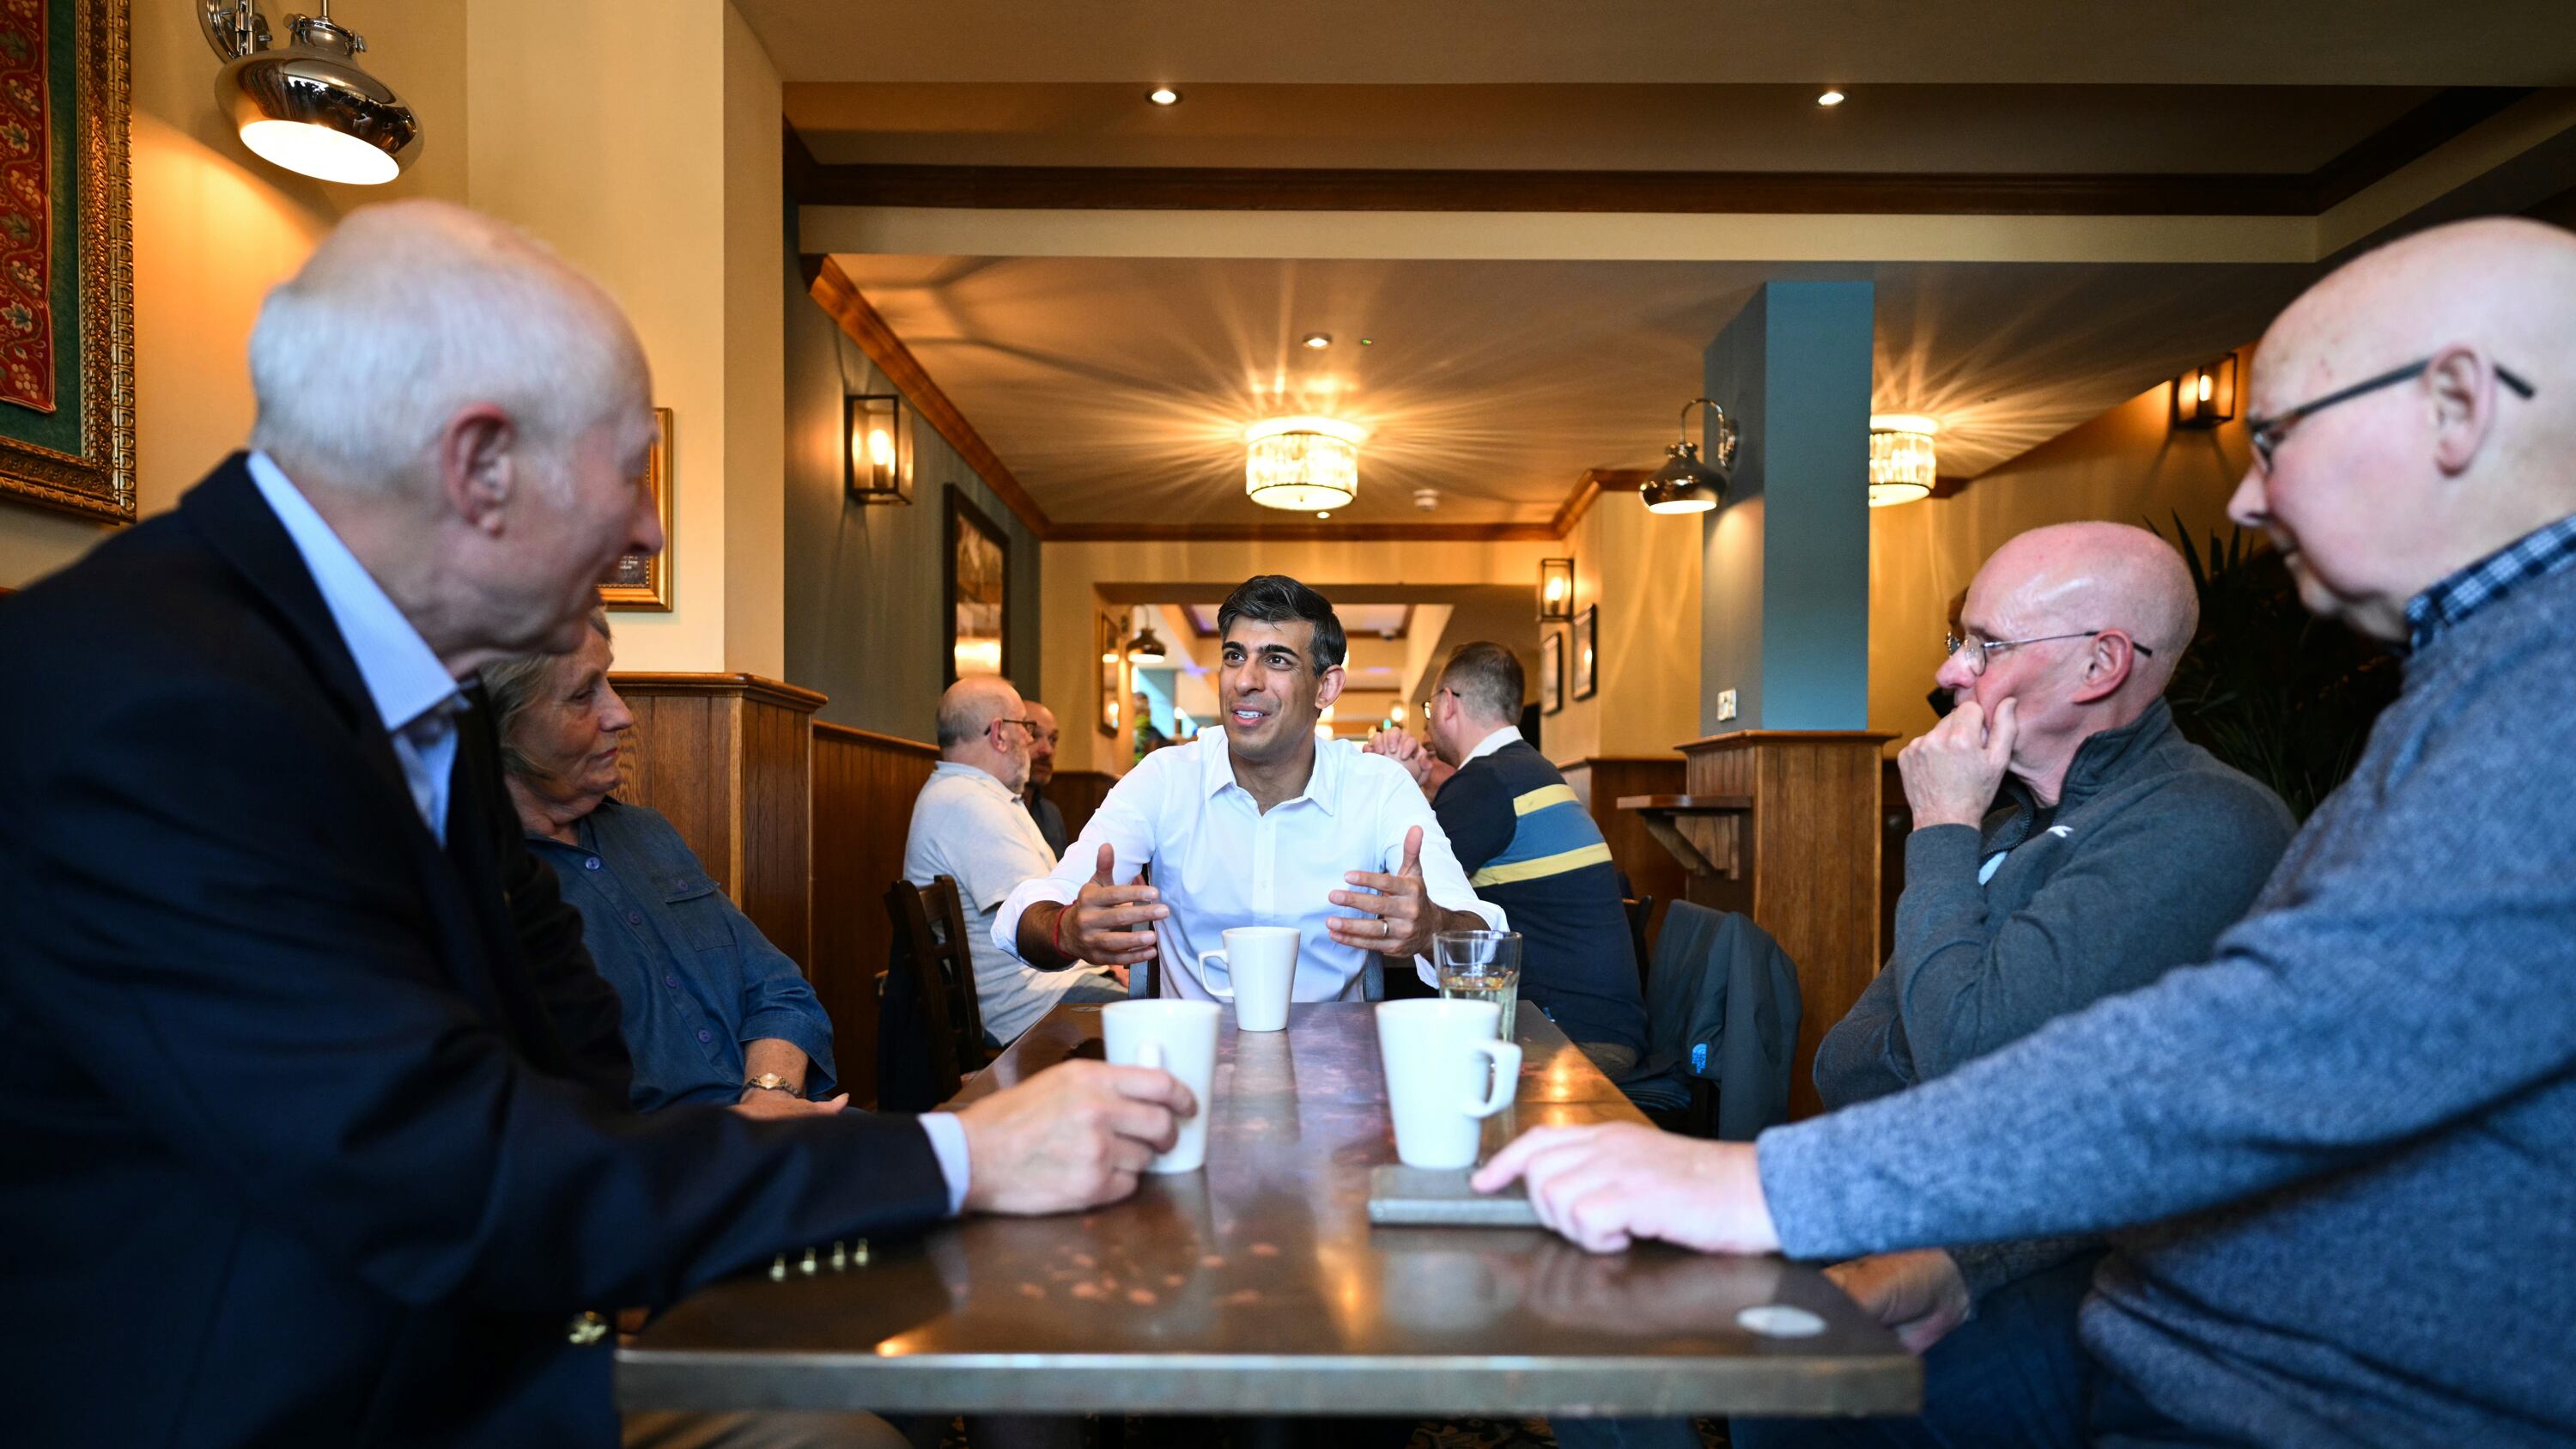 Prime Minister Rishi Sunak in his constituency in Northallerton meets veterans (clockwise from l to r) Douglas and wife Vicky Rudd, Mike Crisp and Michael Lloyd